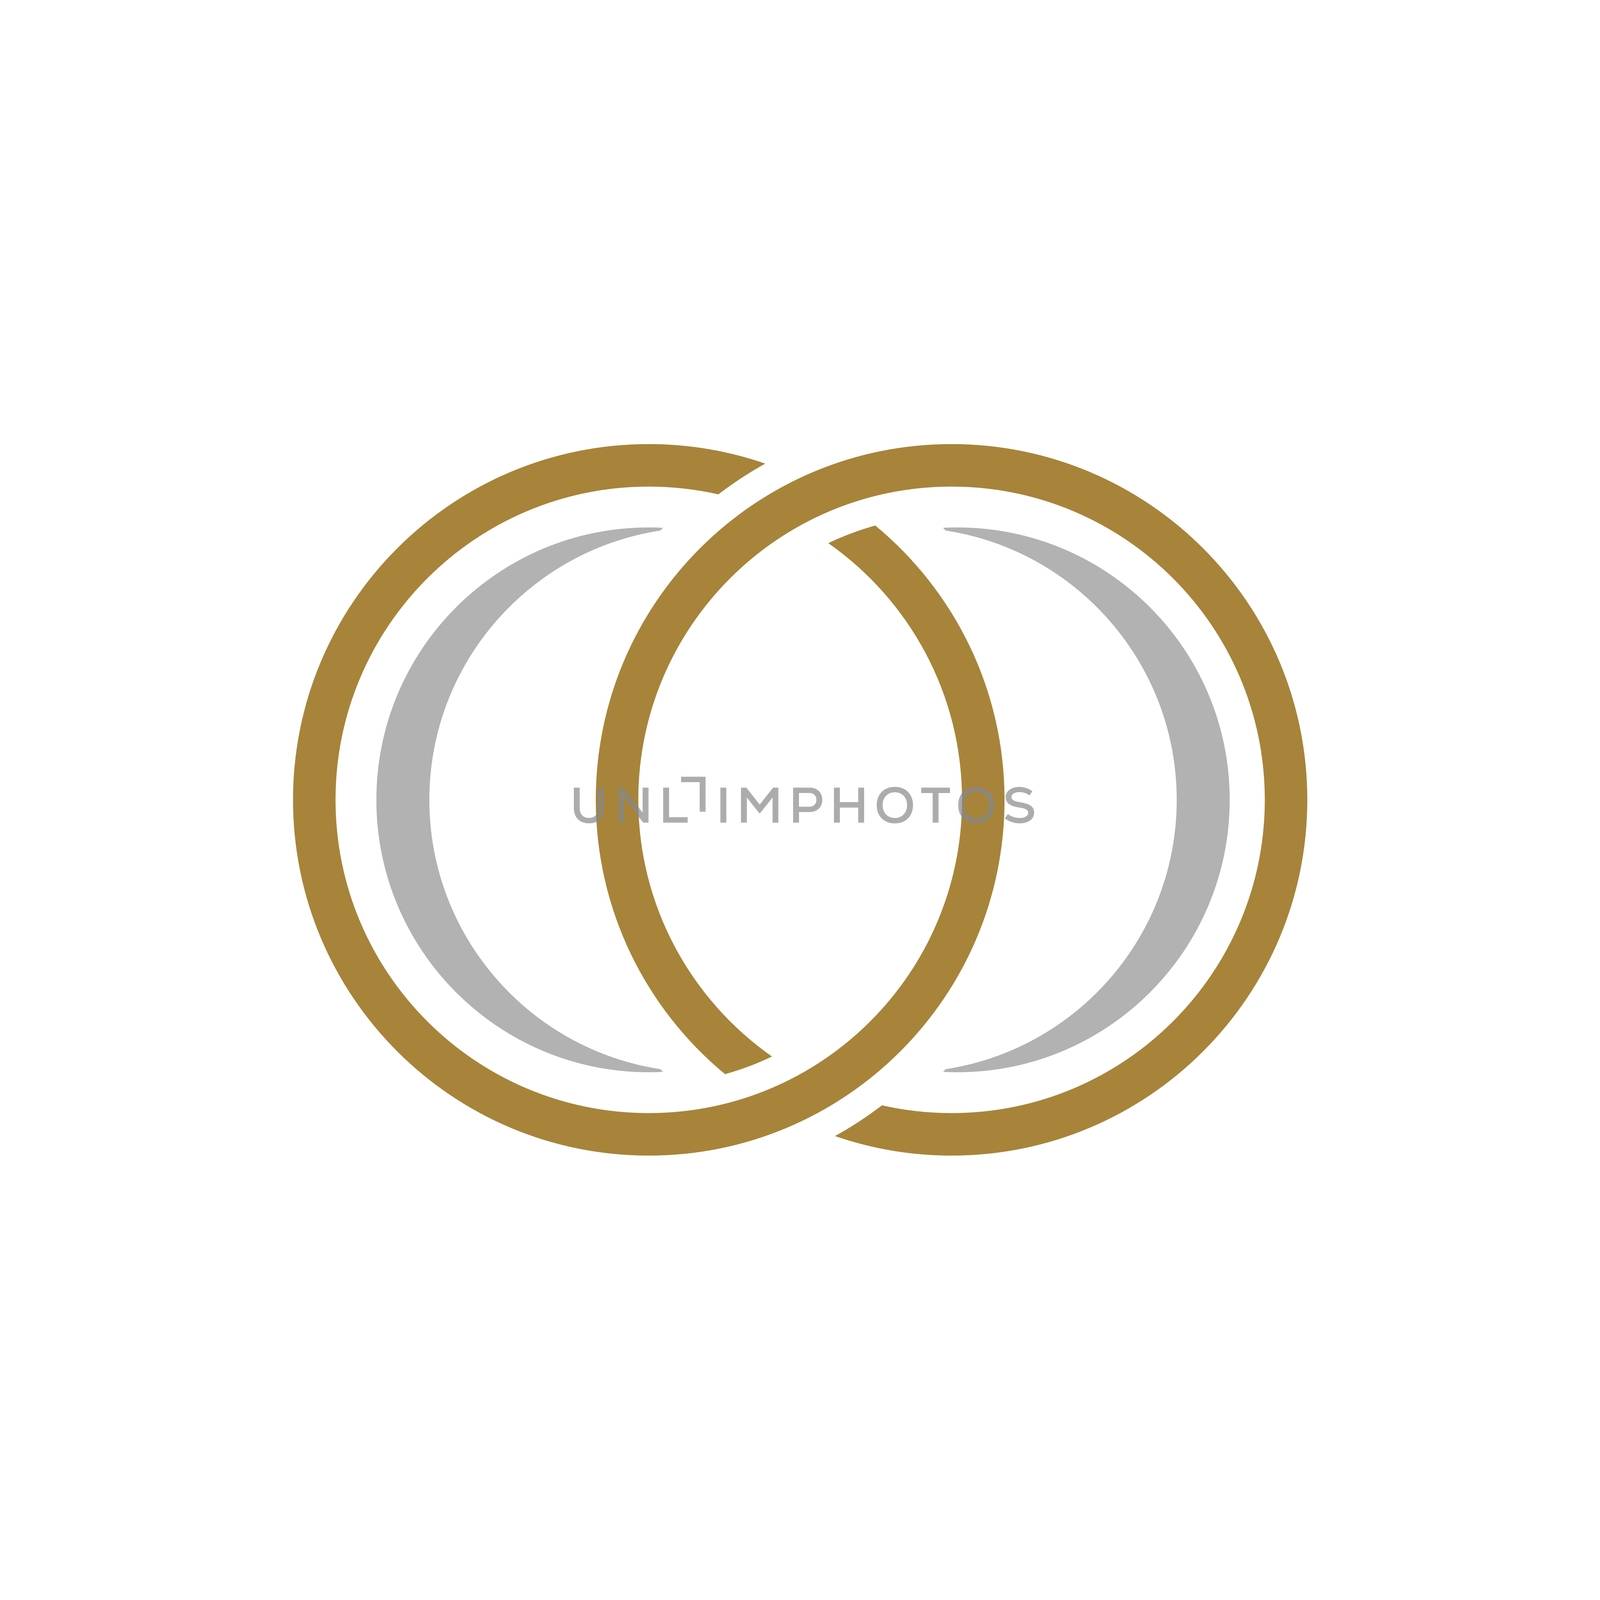 Two Gold Rings Infinity Logo Template Illustration Design. Vector EPS 10. by soponyono1